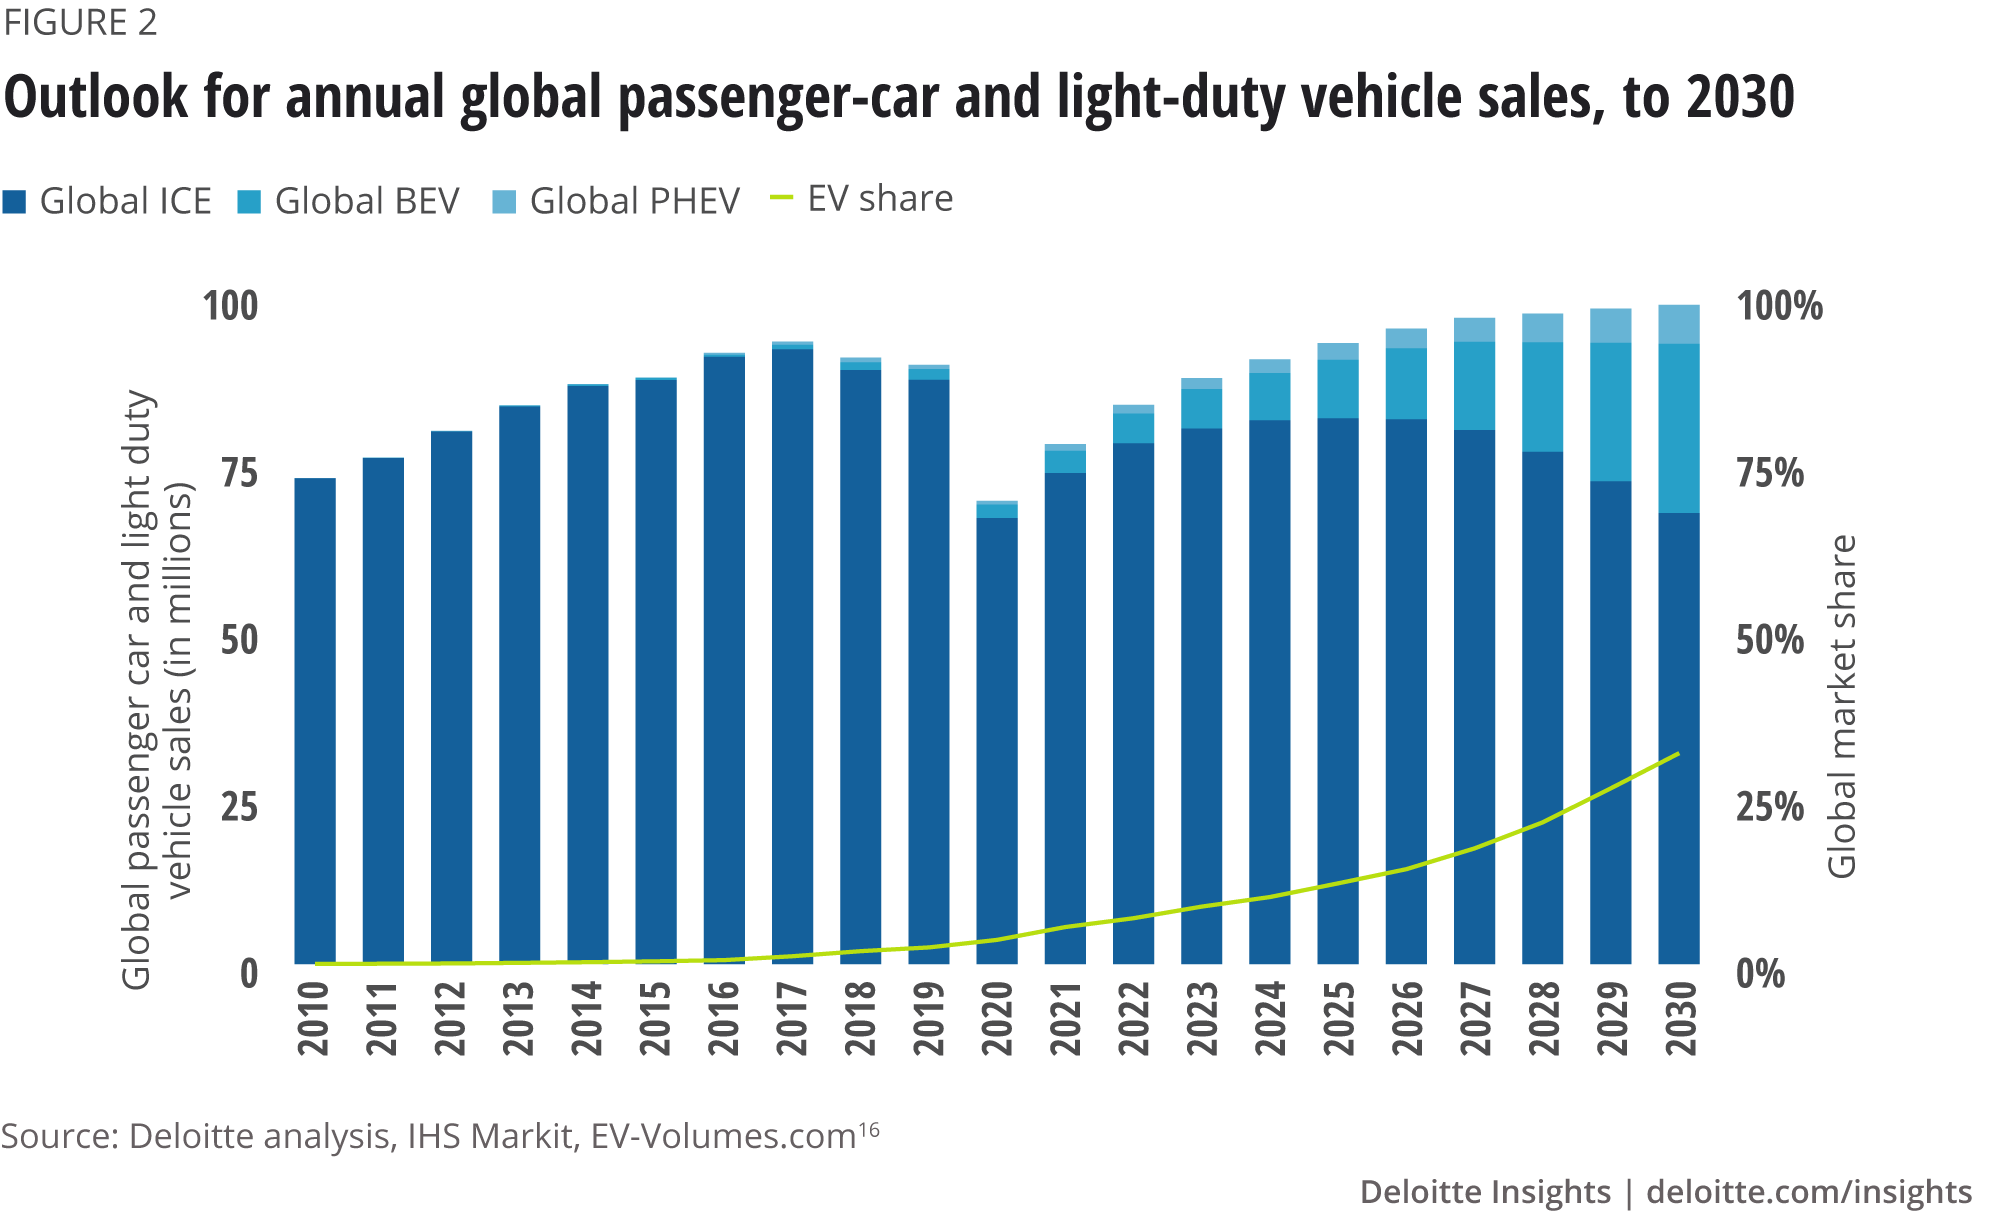 Outlook for annual global passenger-car and light-duty vehicle sales, to 2030